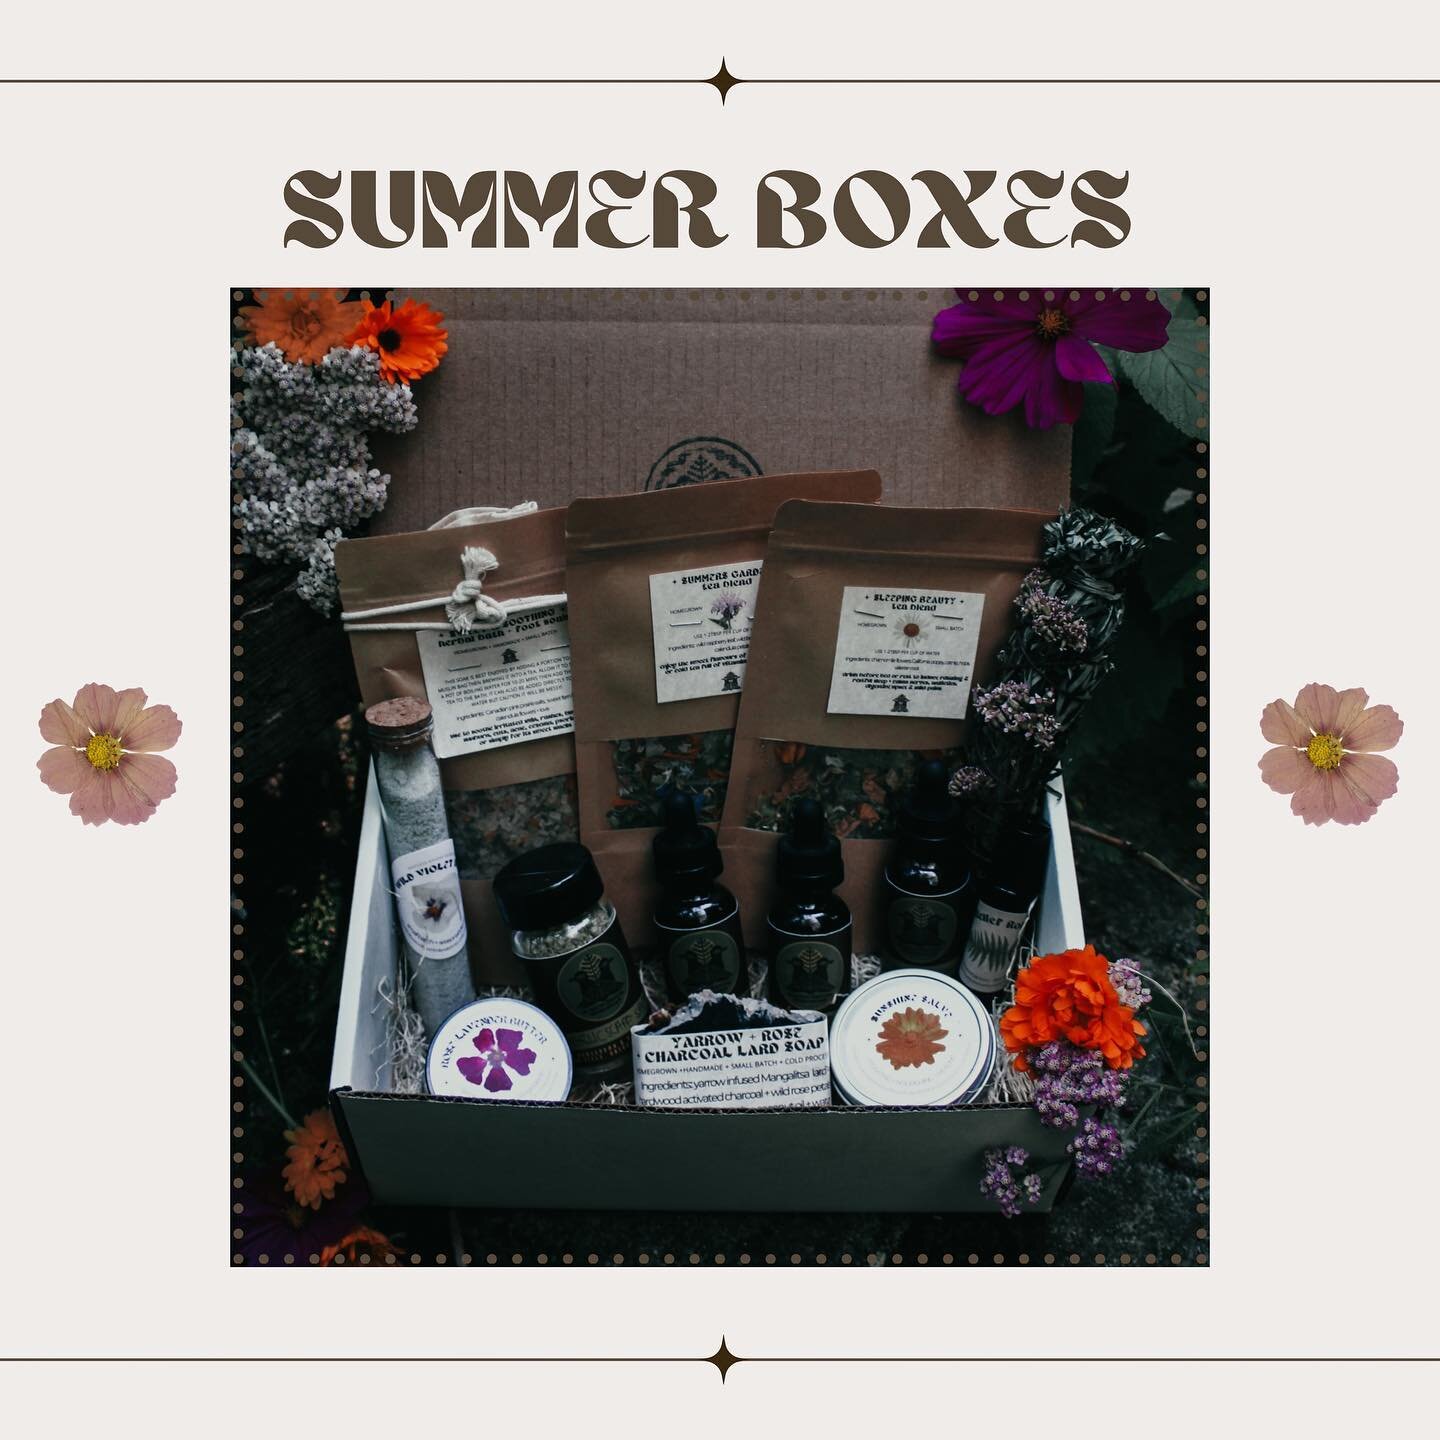 Summer CSH Boxes 🌸 with the abundance of the busy summer season we have a few extra boxes available on our website for purchase. 

Available are these three exact boxes:
Large summer box $100 plus shipping
Small Box #1 or #2: $80 plus shipping 

LOC